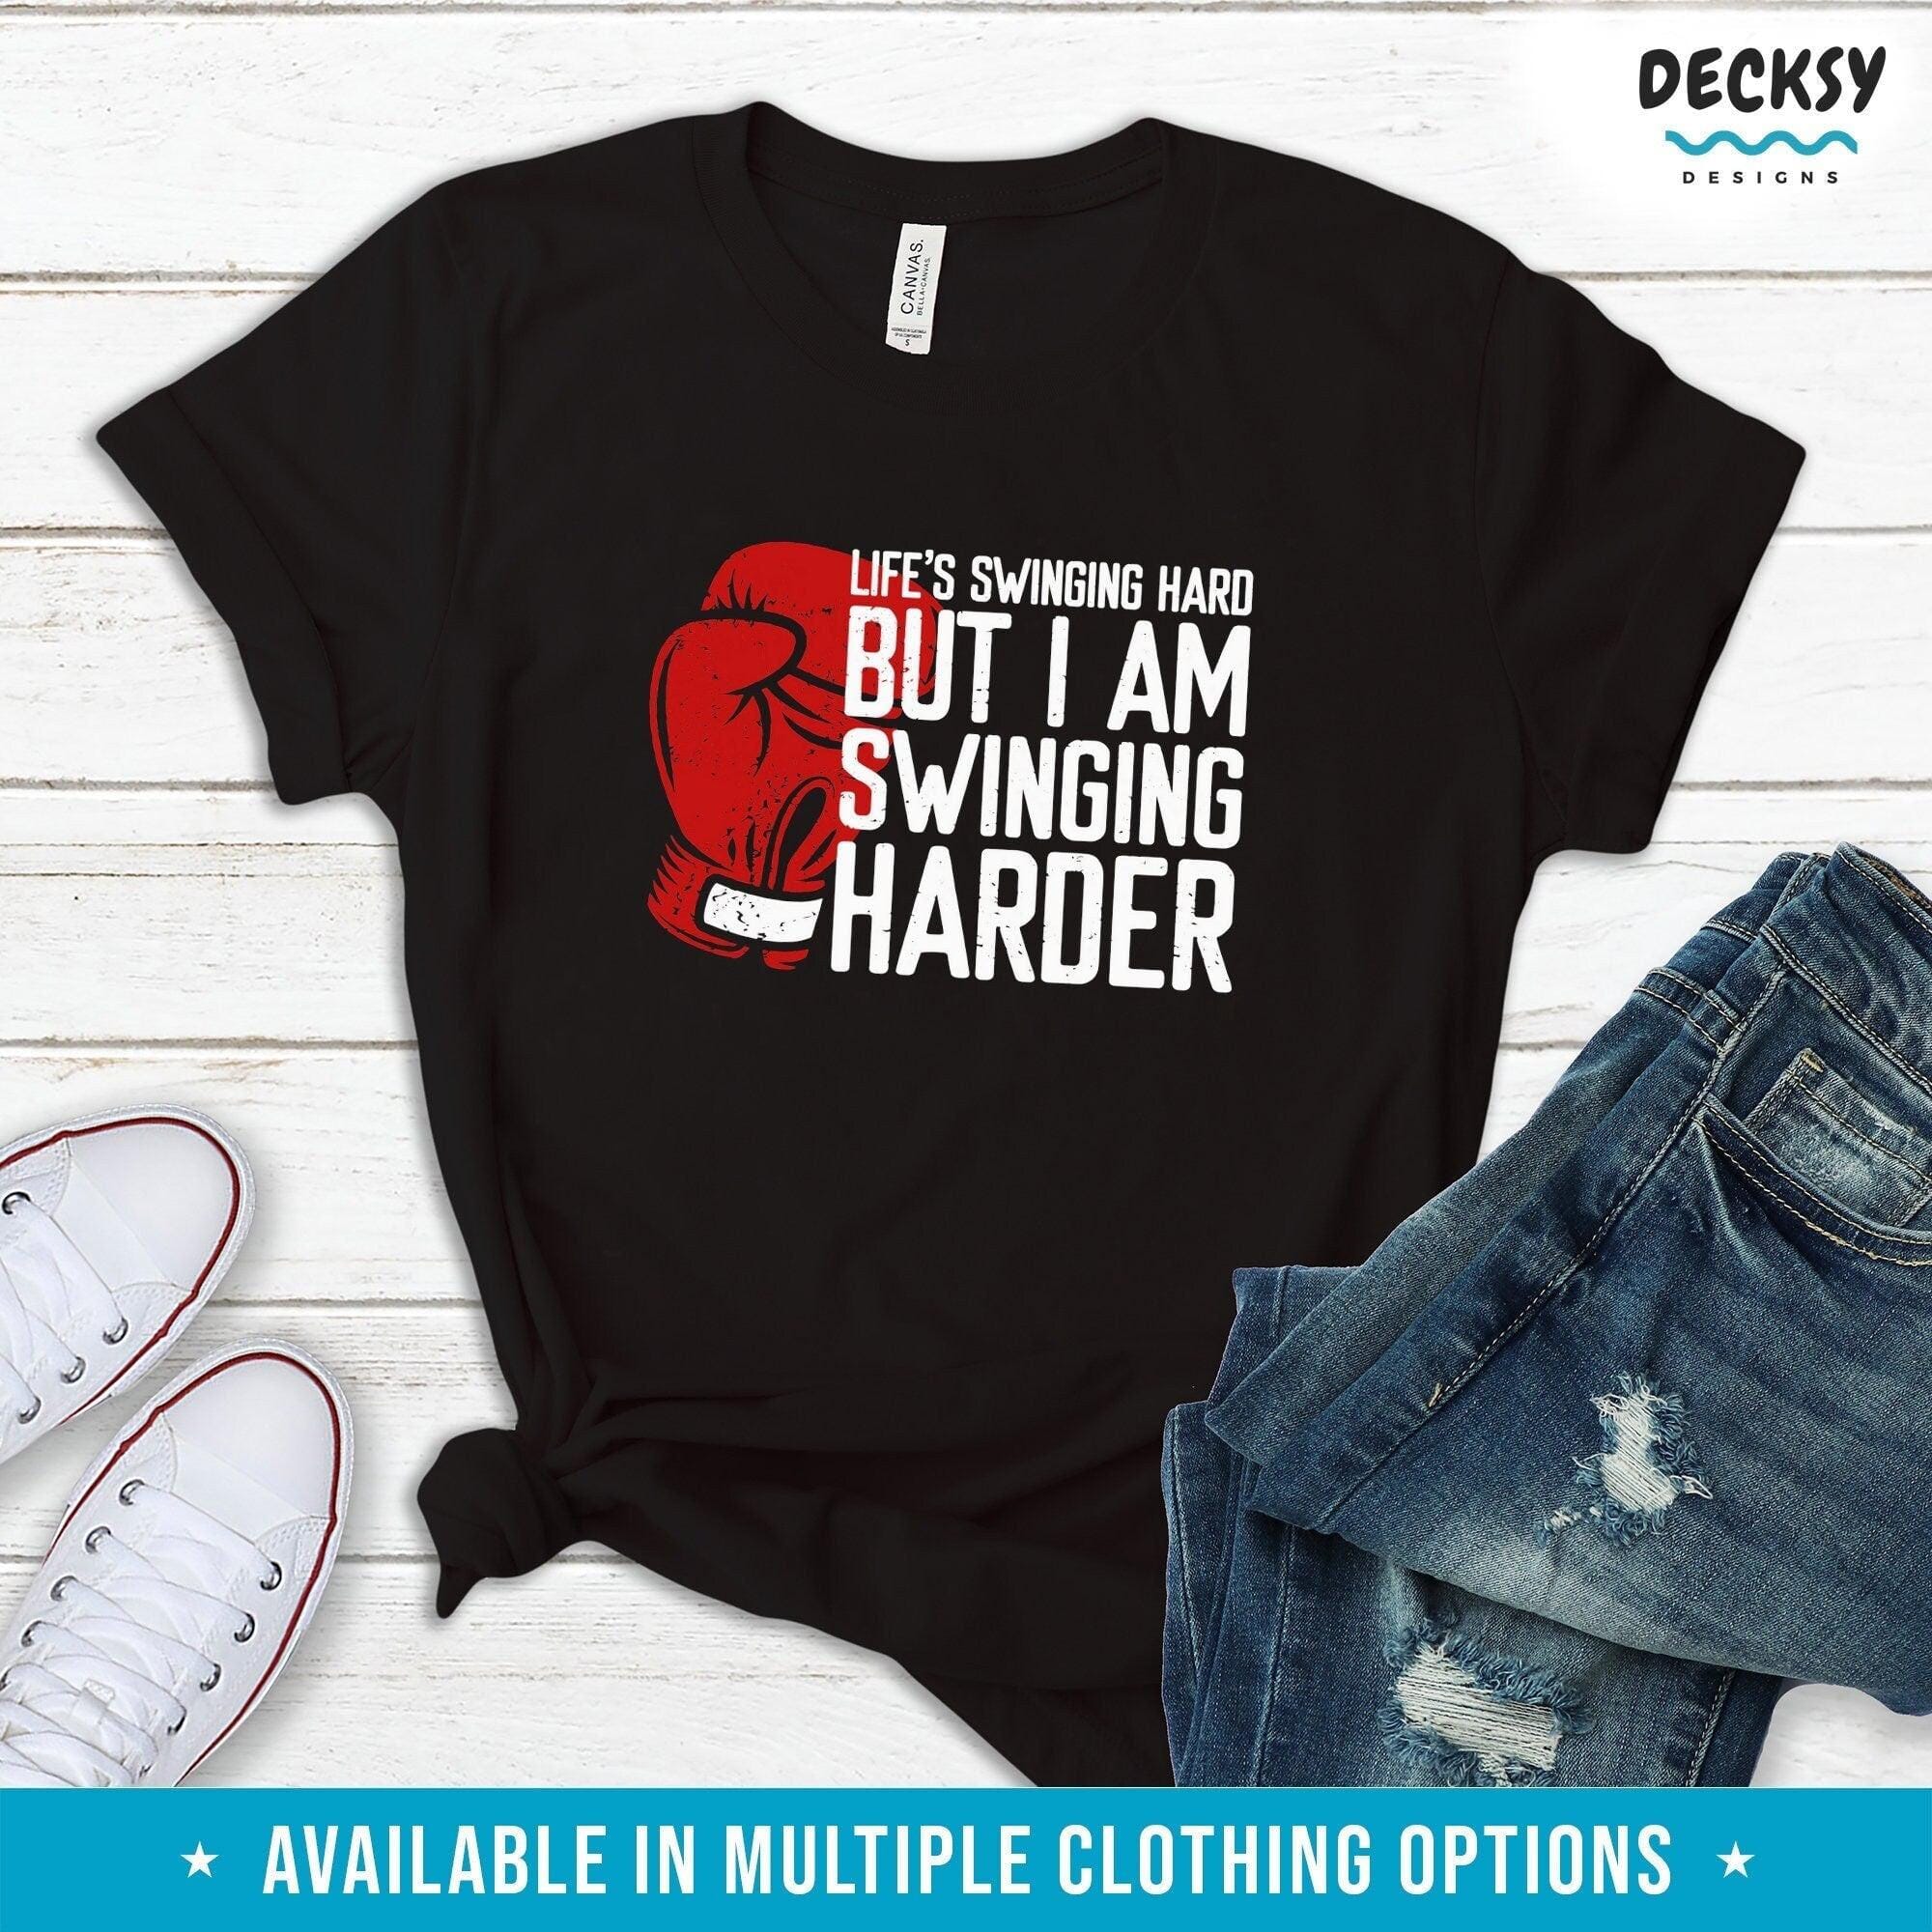 Boxing Shirt, Gift For Boxer-Clothing:Gender-Neutral Adult Clothing:Tops & Tees:T-shirts:Graphic Tees-DecksyDesigns